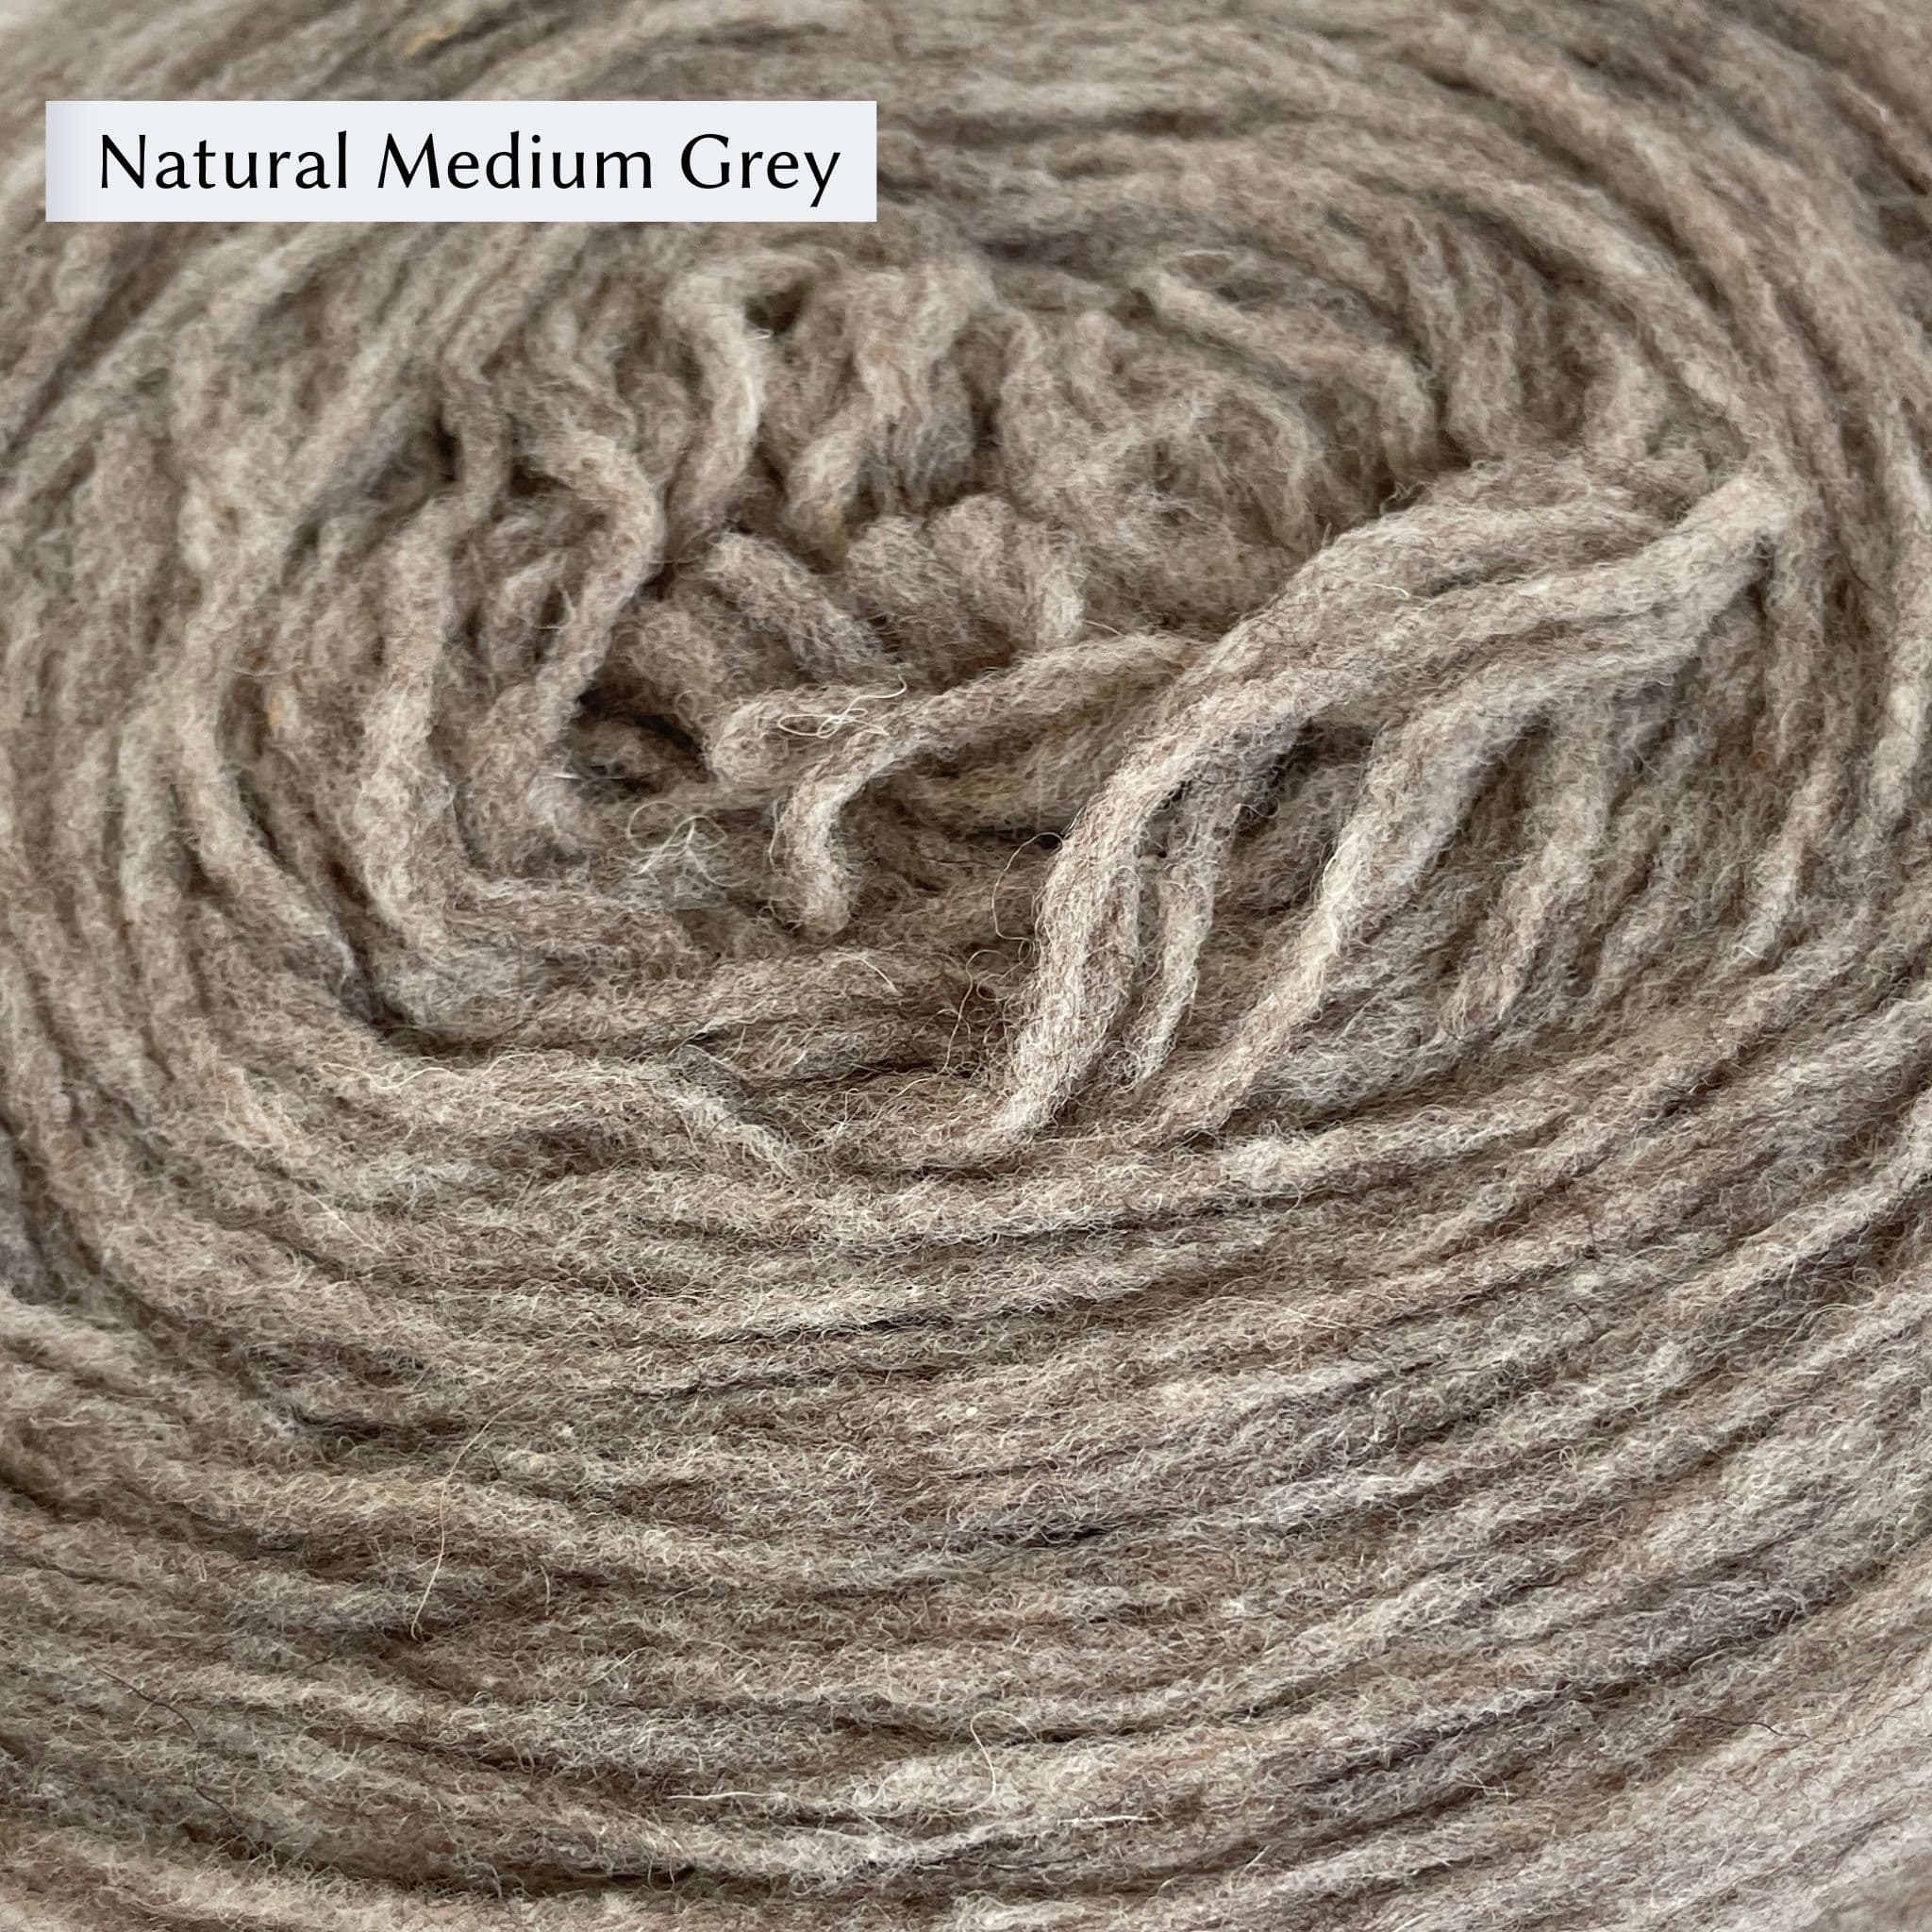 Manchelopis, a unspun yarn, in color Natural Medium Grey, a warm mid-tone light grey